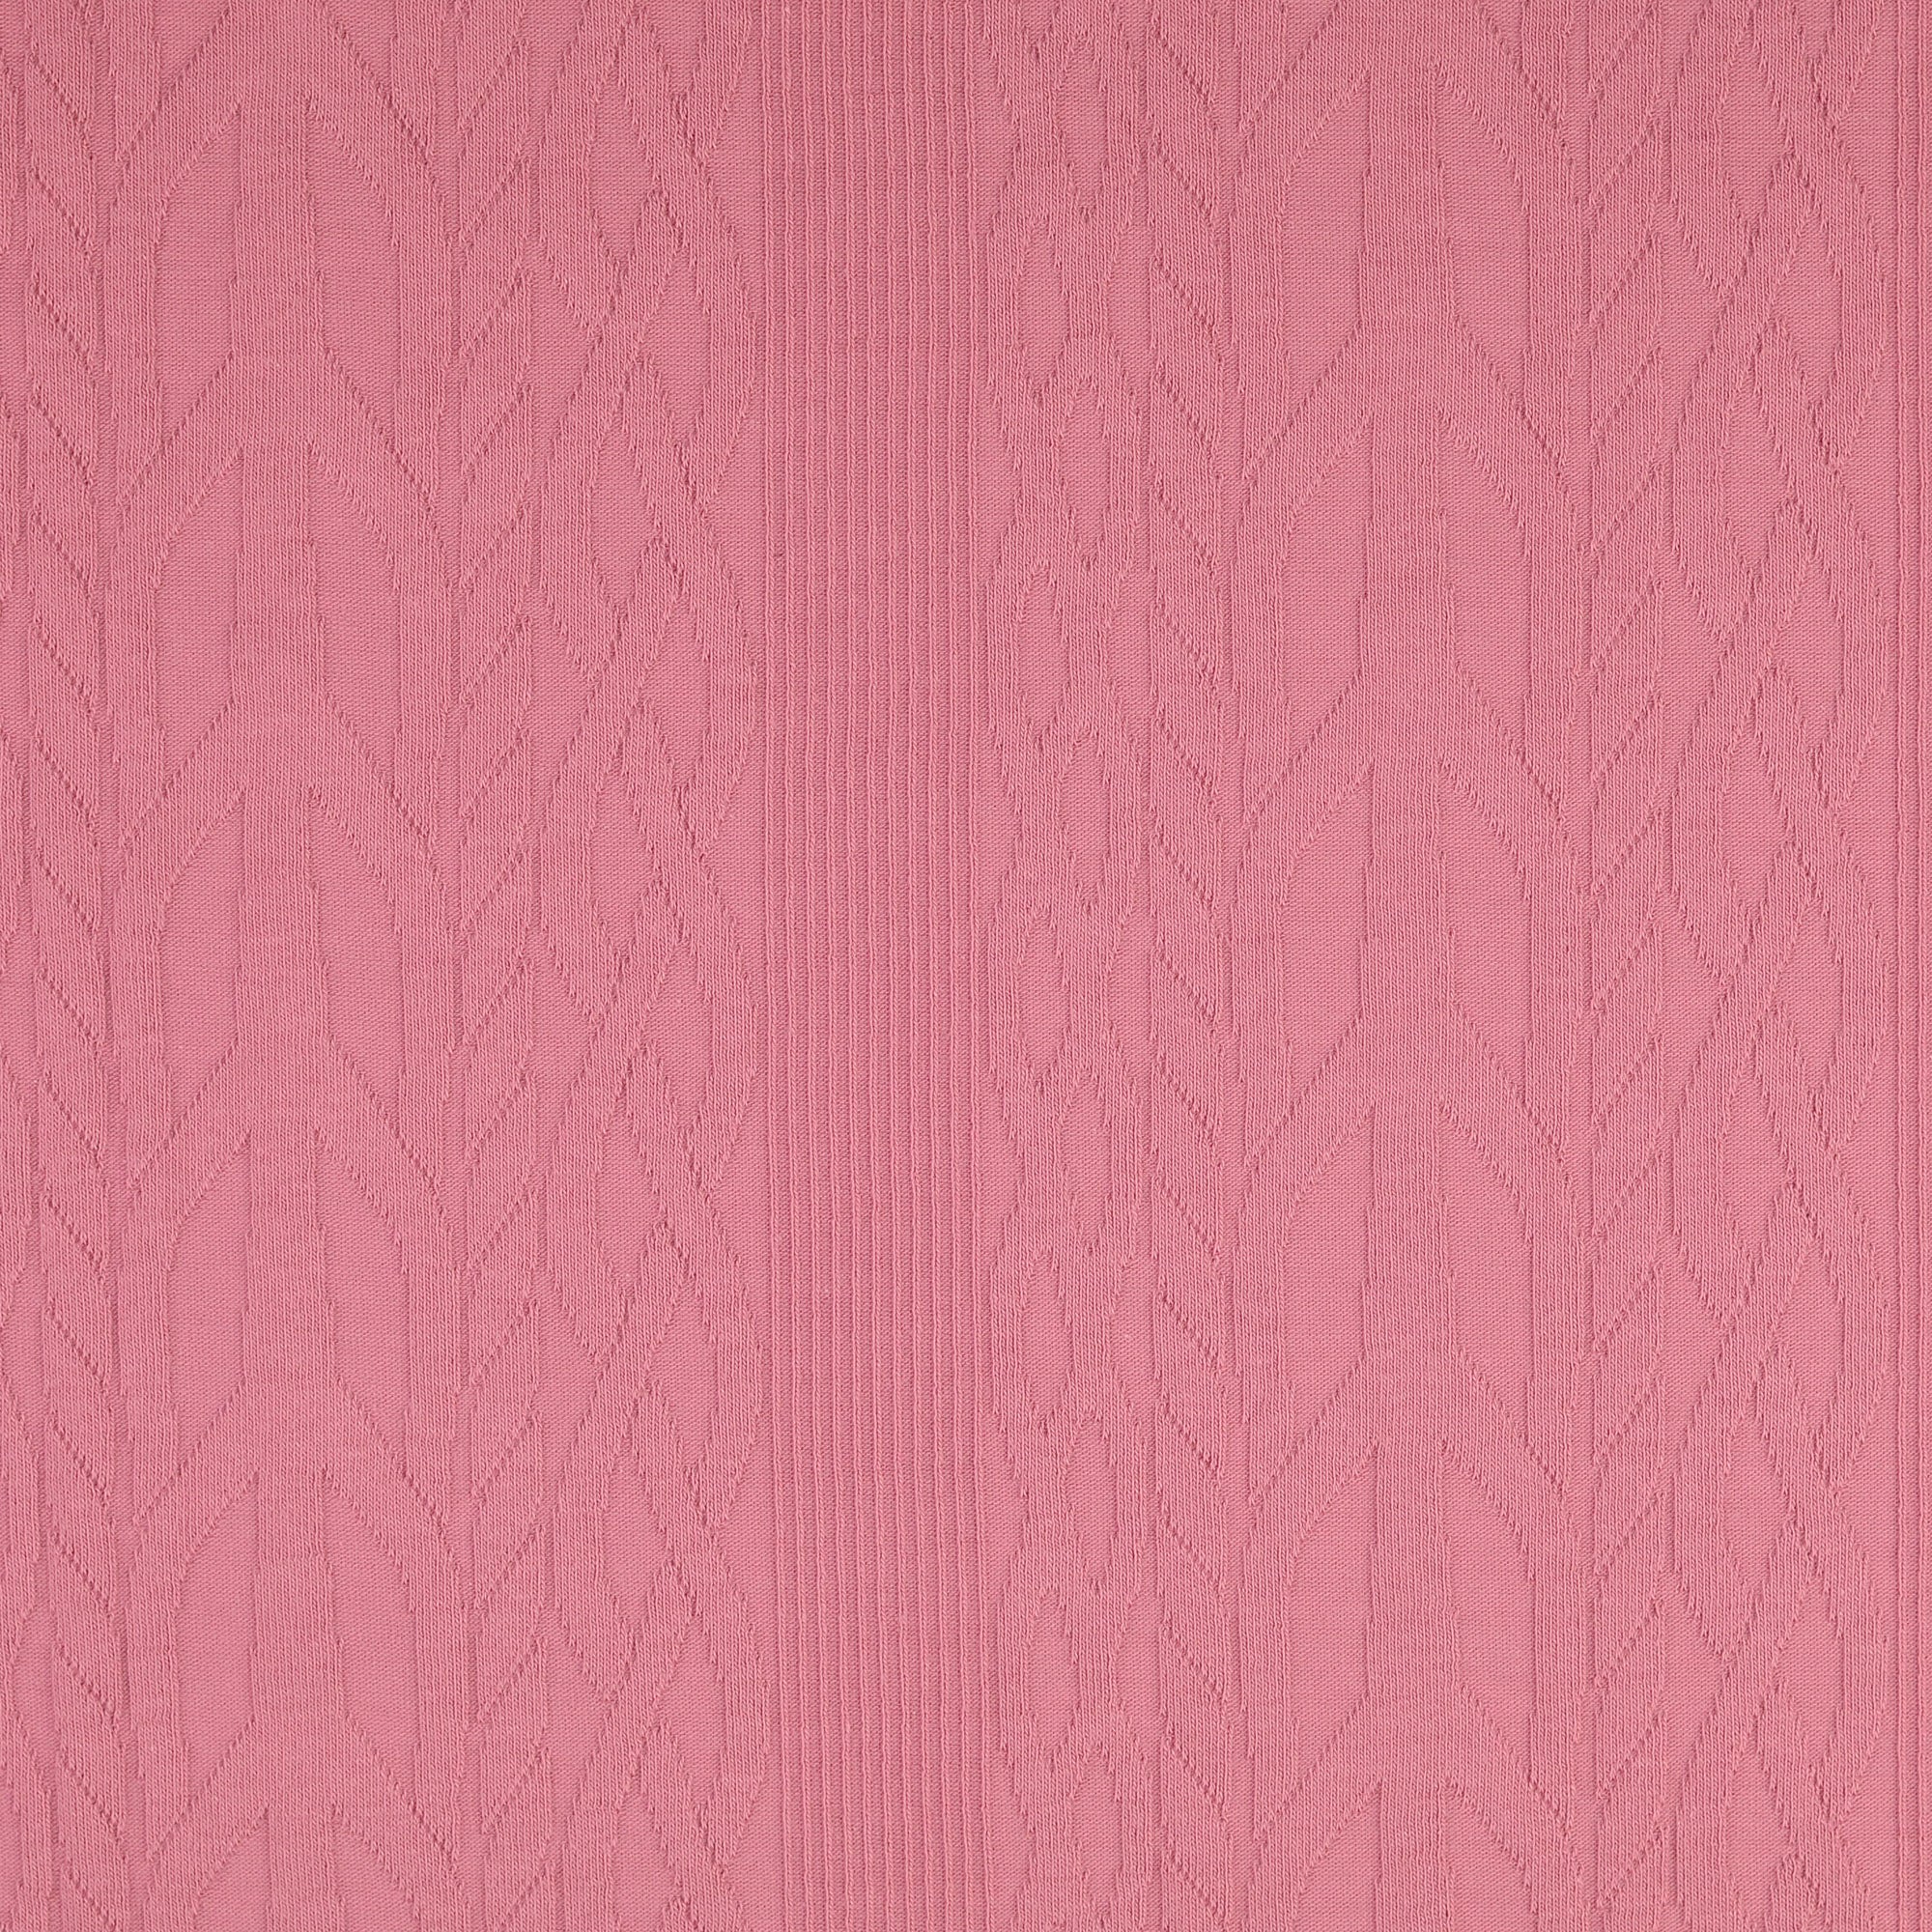 REMNANT 0.71 Metre - Cotton Cable Knit Fabric in Pink